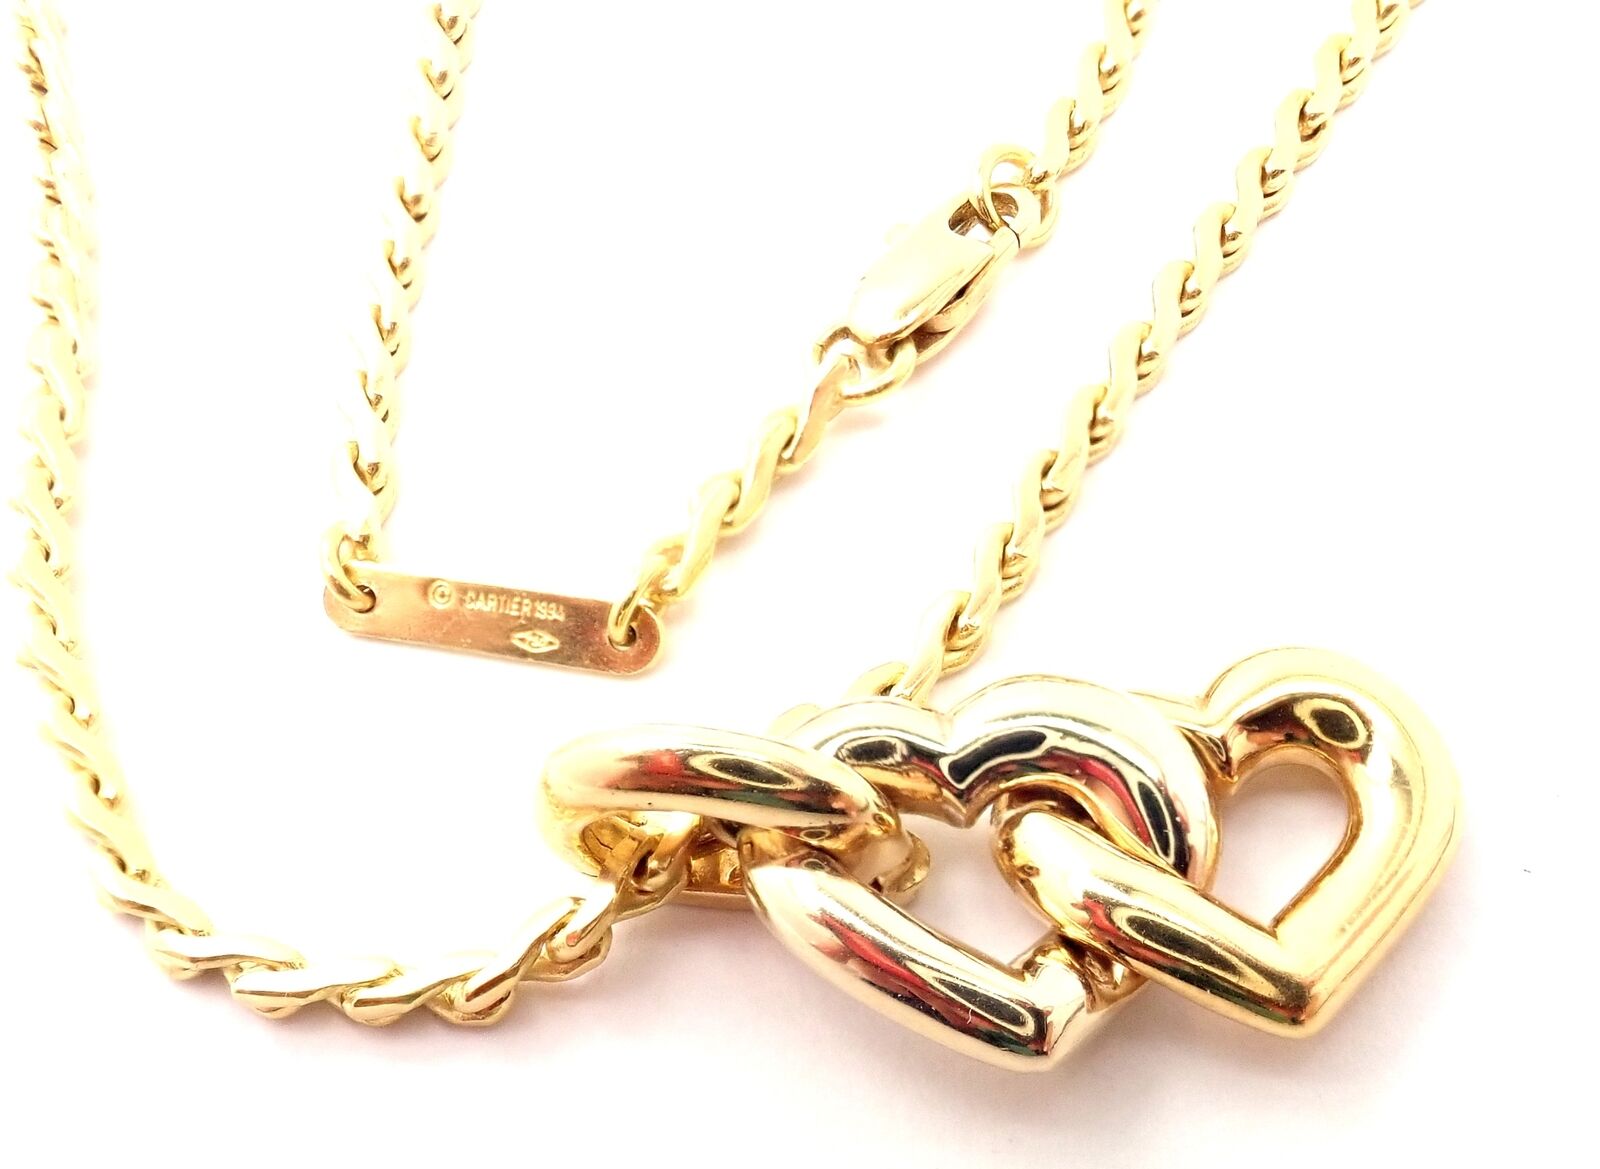 Cartier C flat Code Necklace 750(WG) Total 11.7g｜a1316878｜ALLU UK｜The Home  of Pre-Loved Luxury Fashion